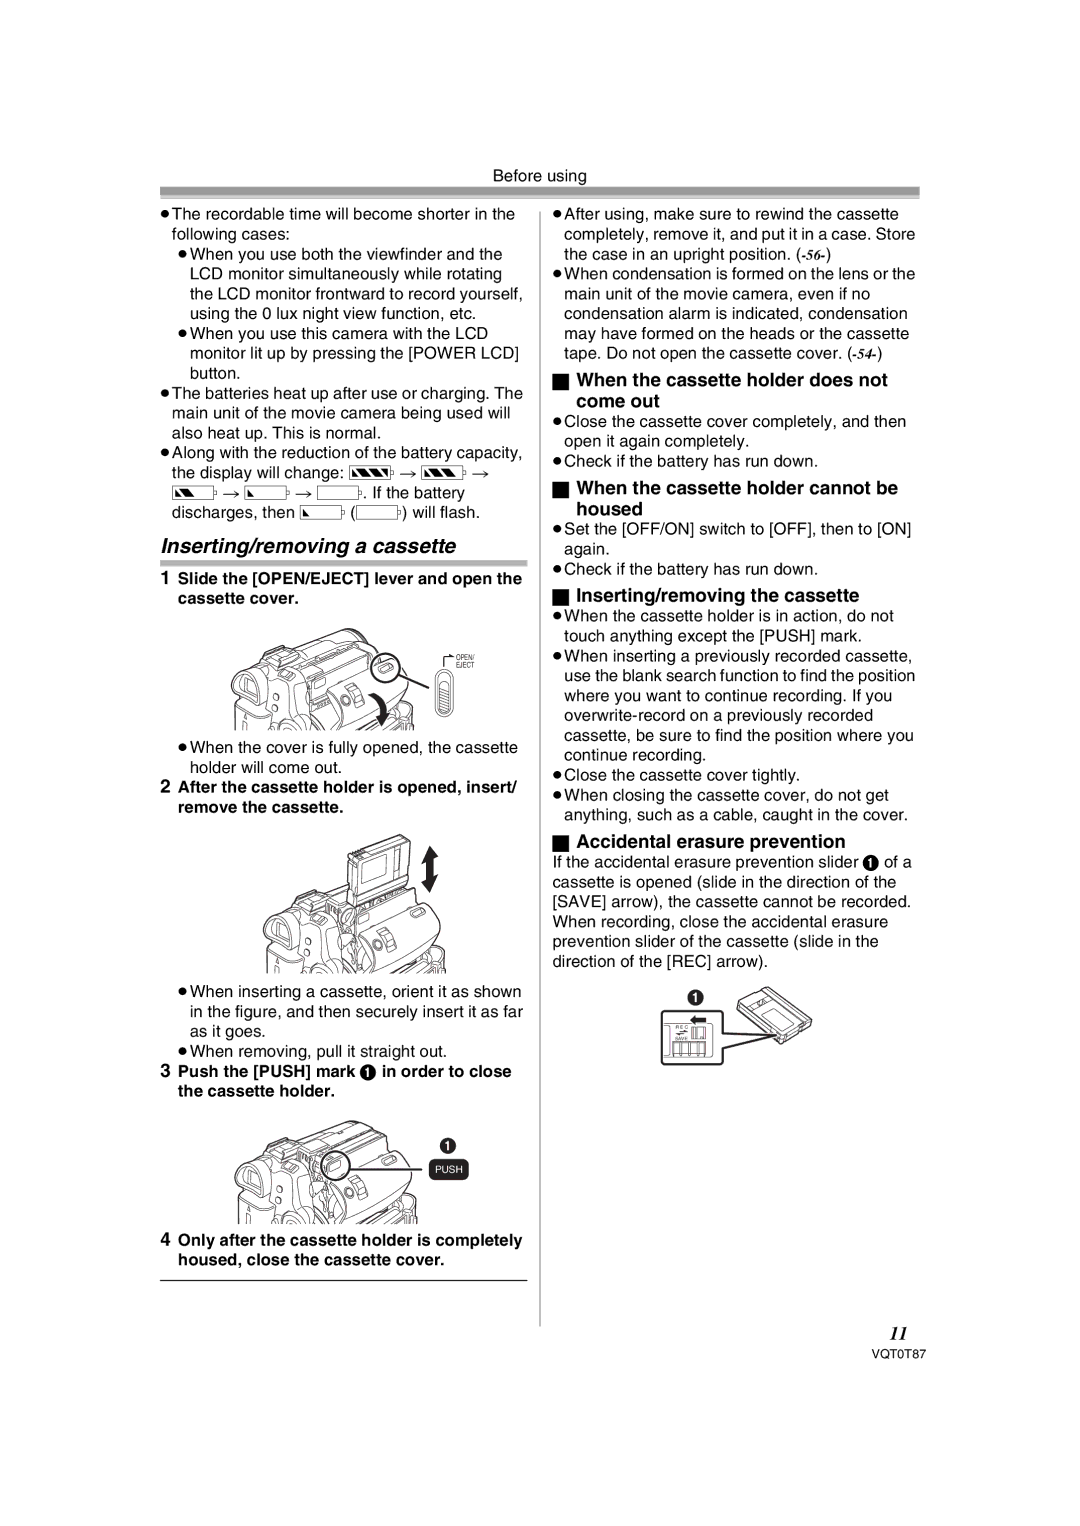 Panasonic NV-GS180EB operating instructions Inserting/removing a cassette, When the cassette holder does not Come out 